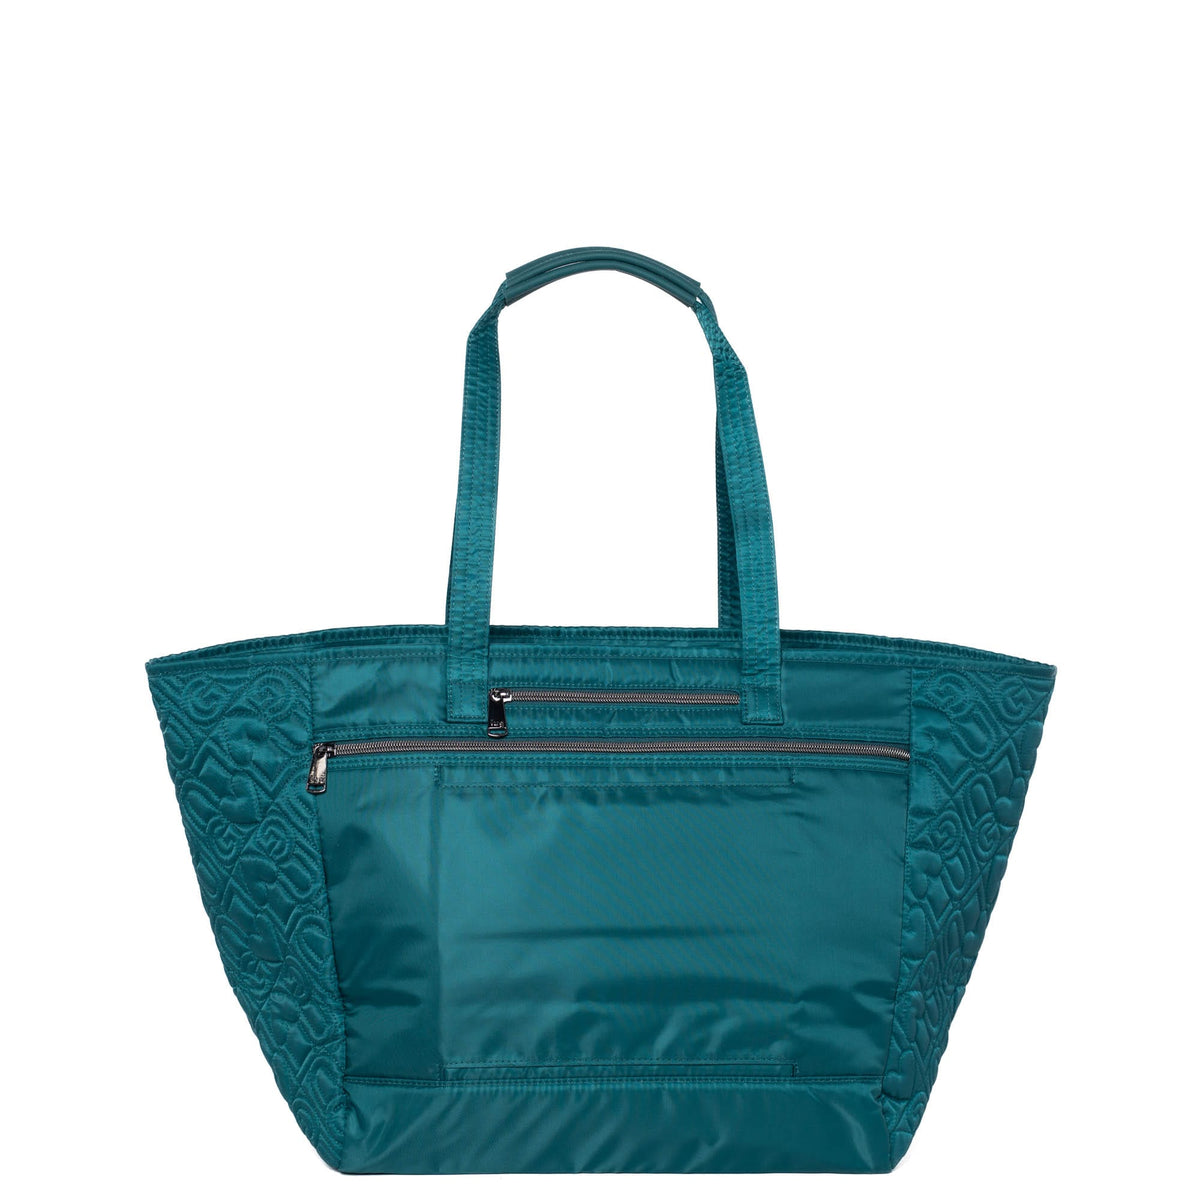 Avion LE Carry-All Tote Bag